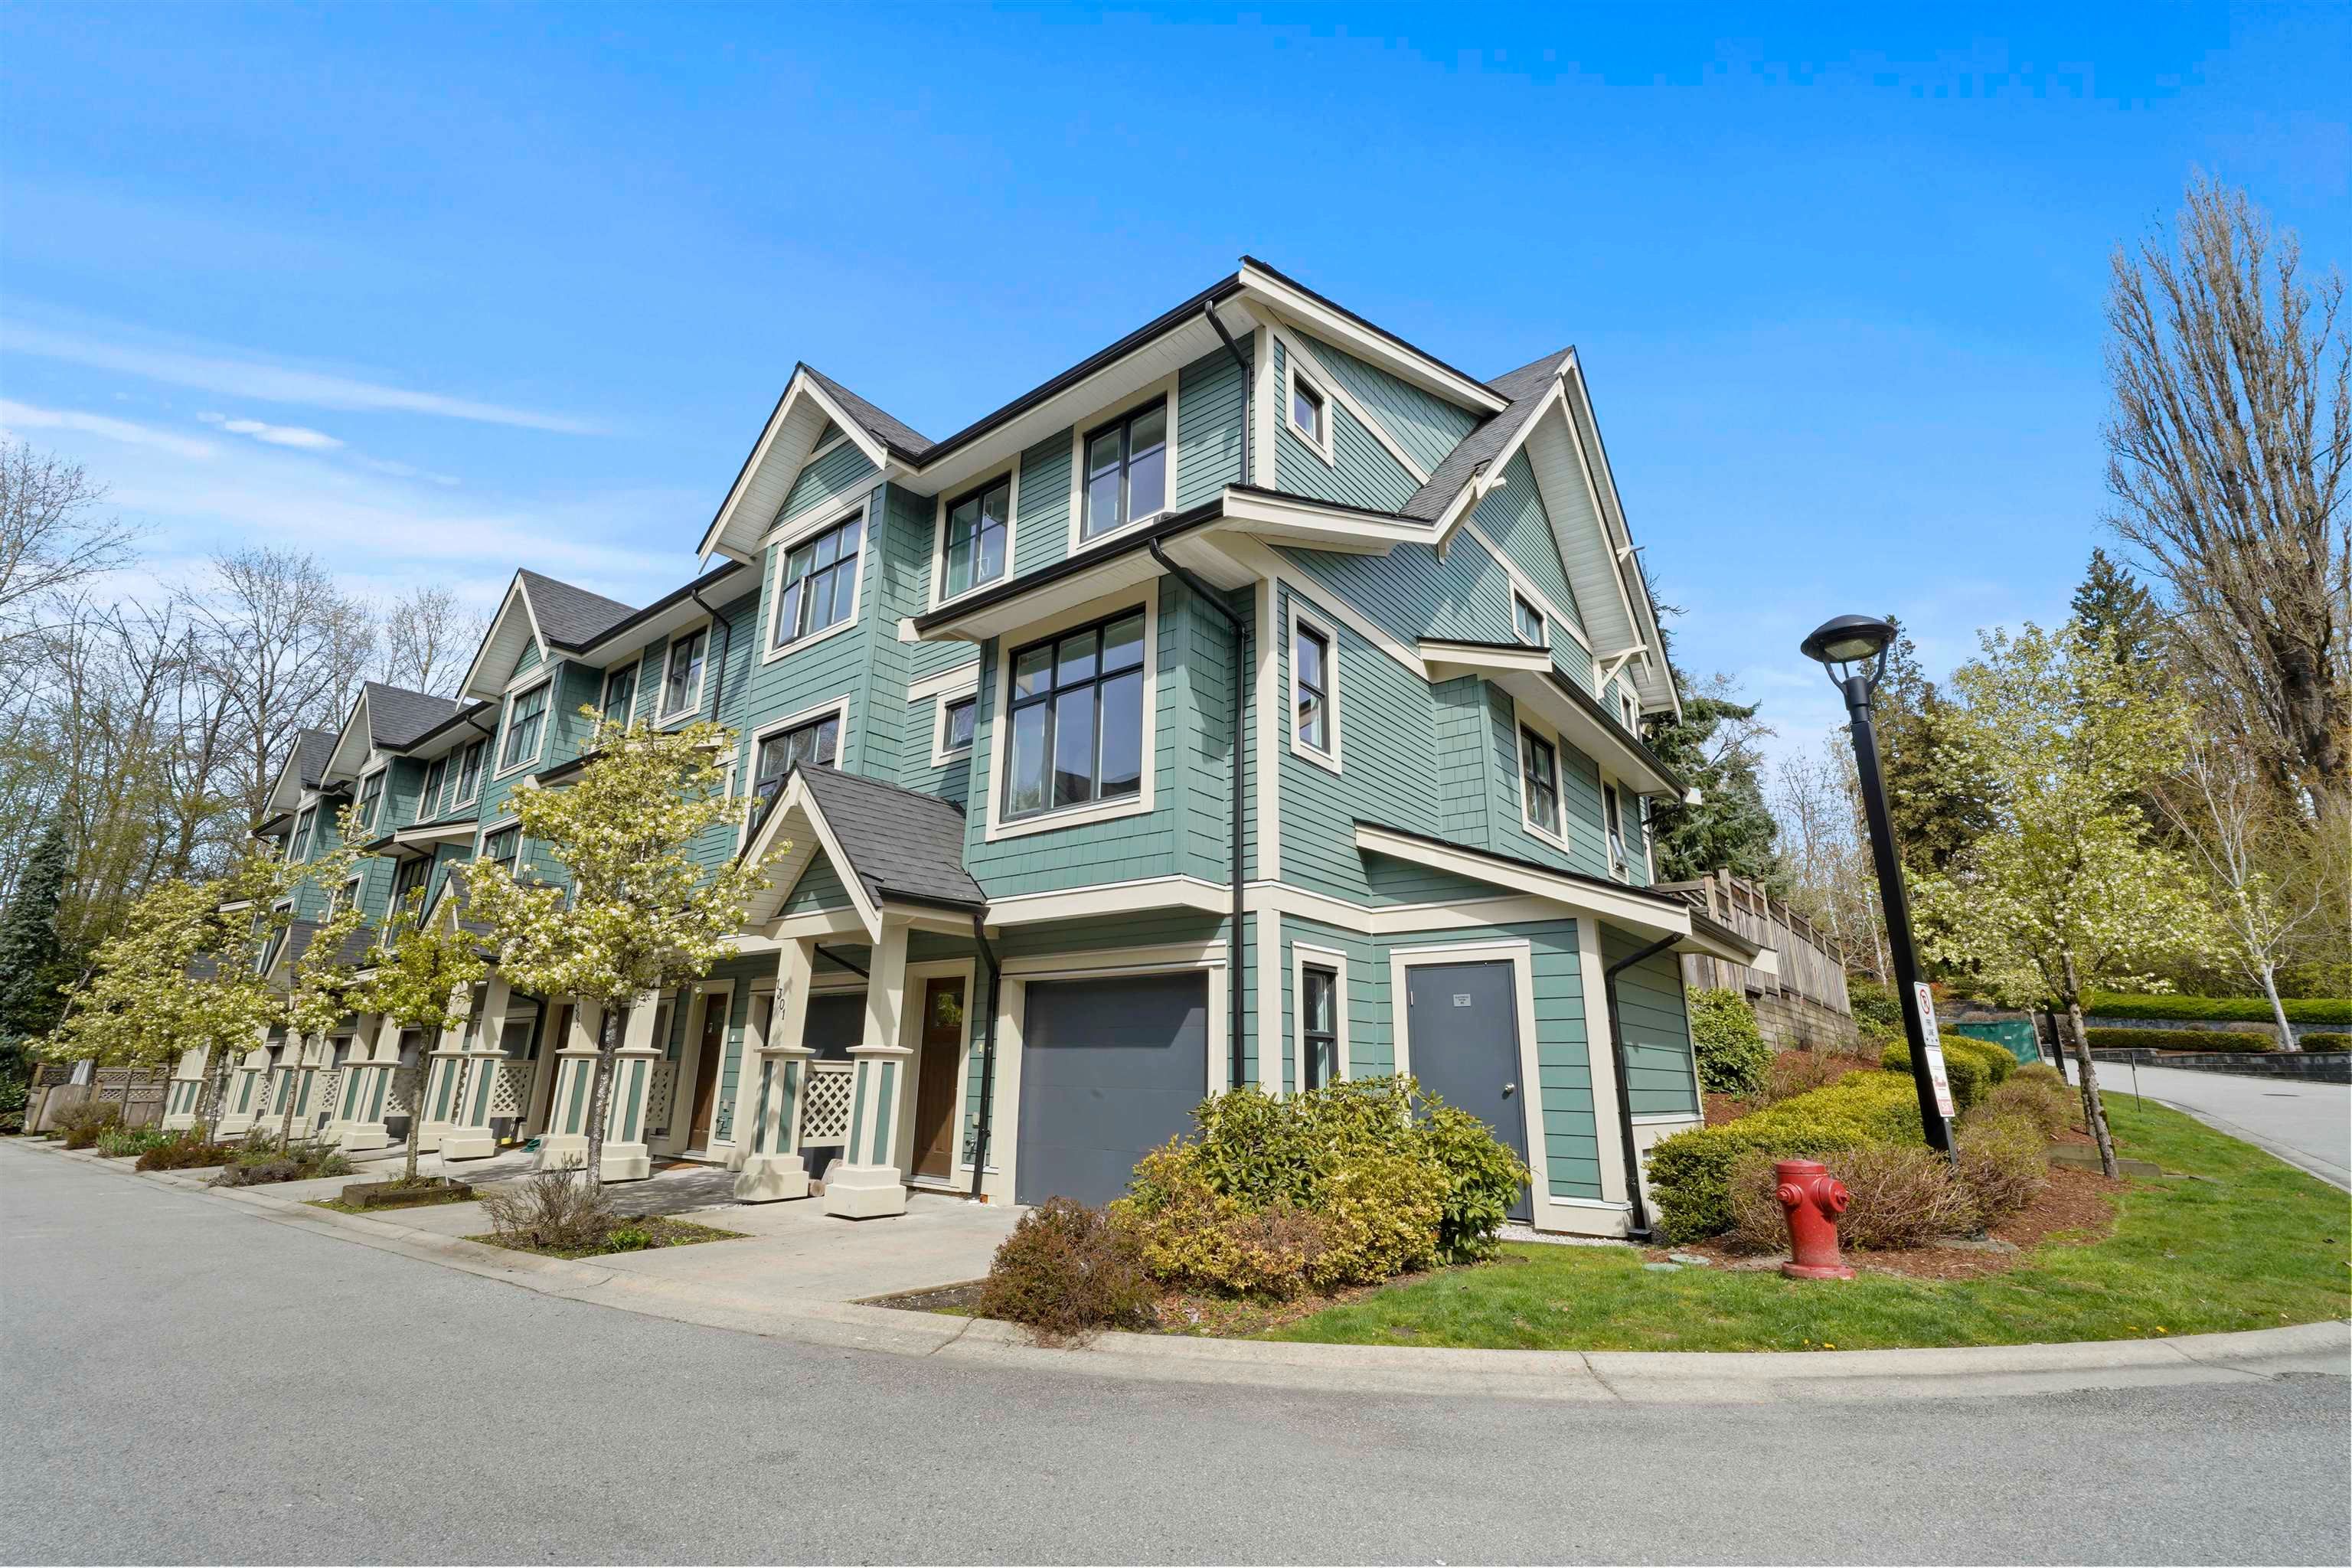 New property listed in Big Bend, Burnaby South